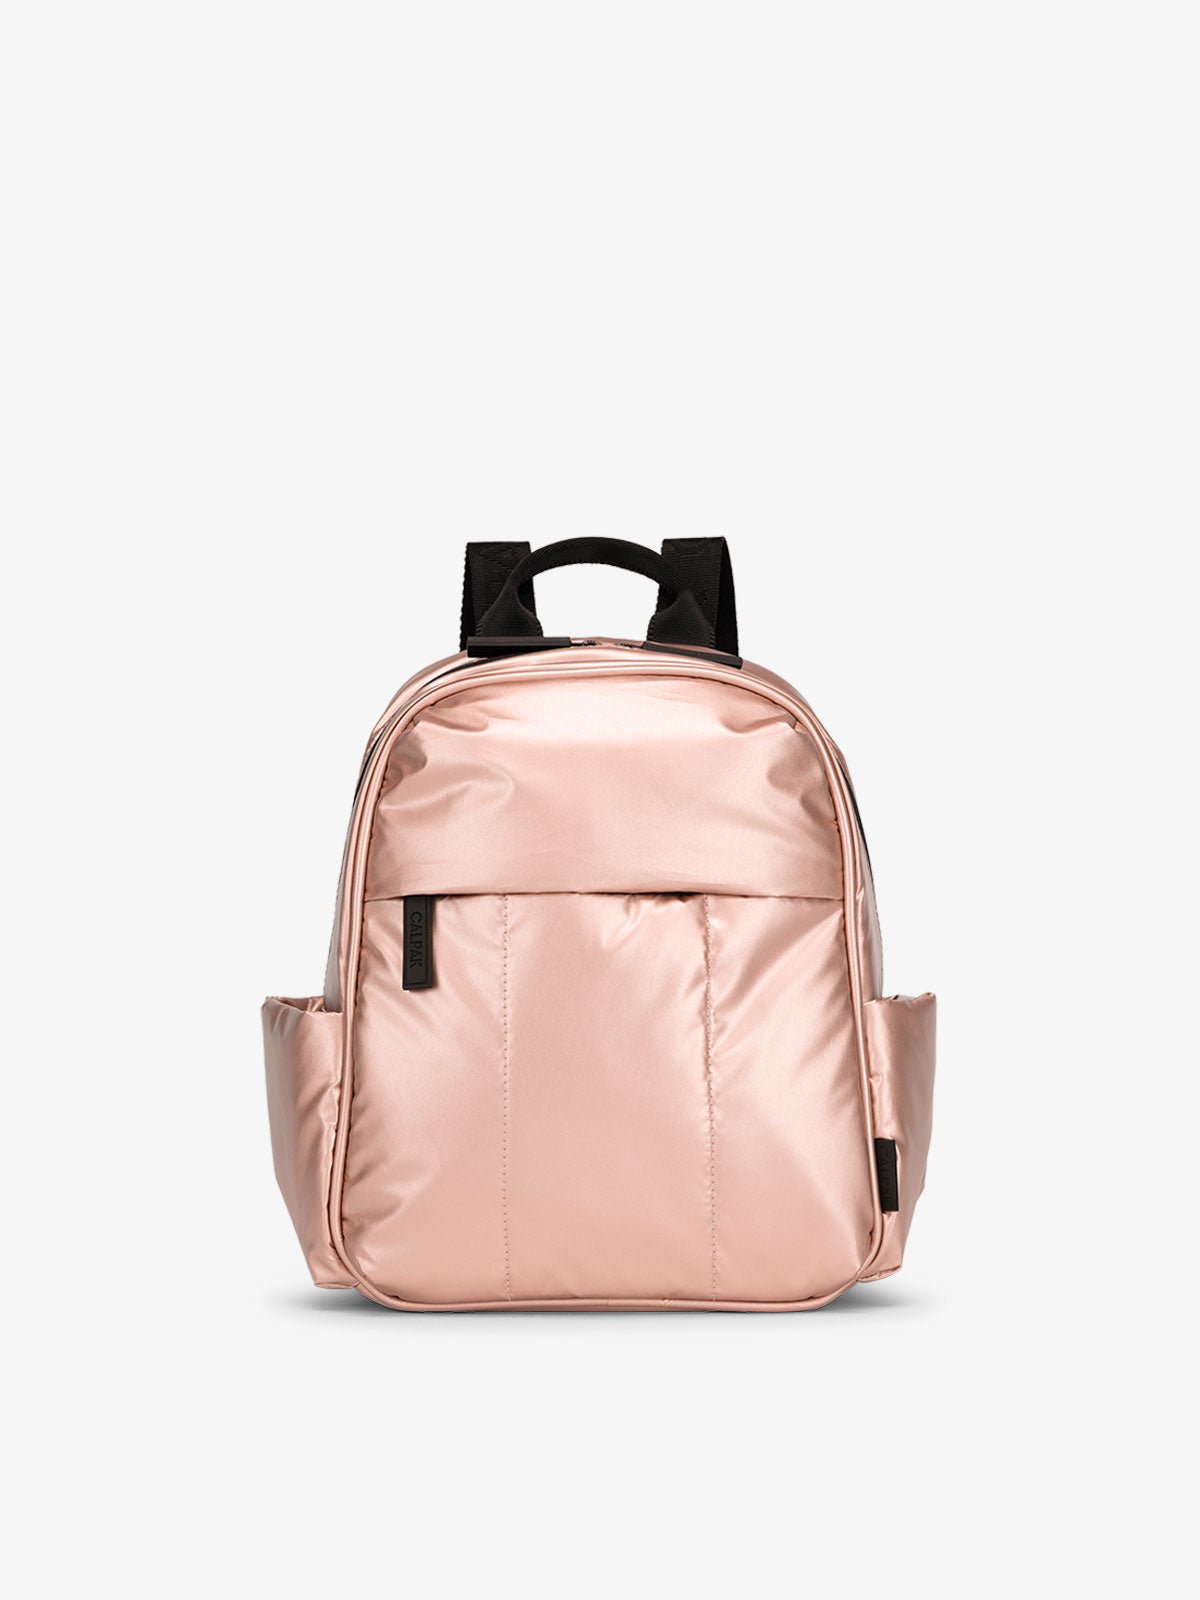 CALPAK Luka Mini Backpack with soft puffy exterior and front zippered pocket in metallic pink